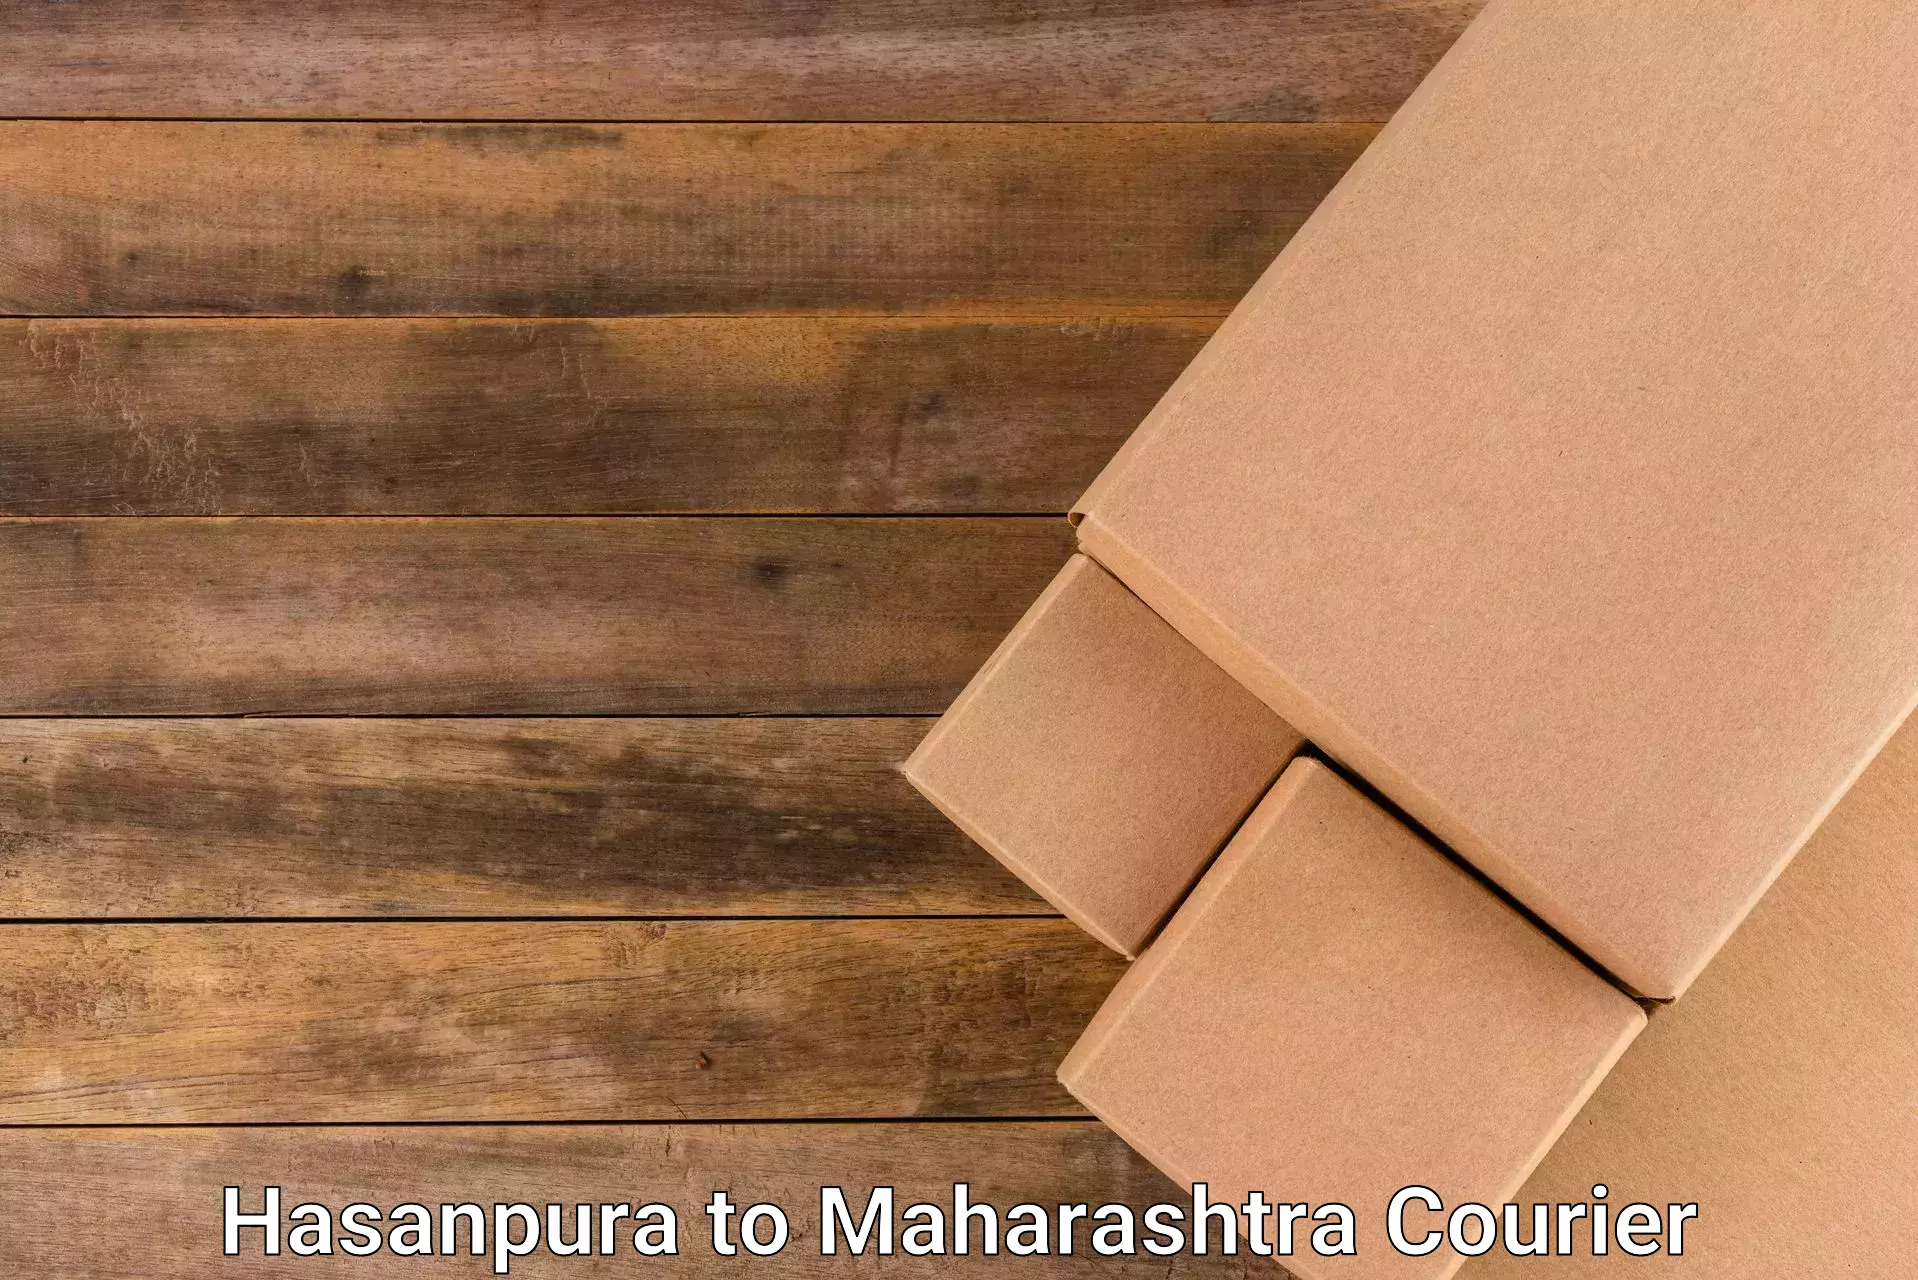 Sustainable delivery practices Hasanpura to IIT Mumbai